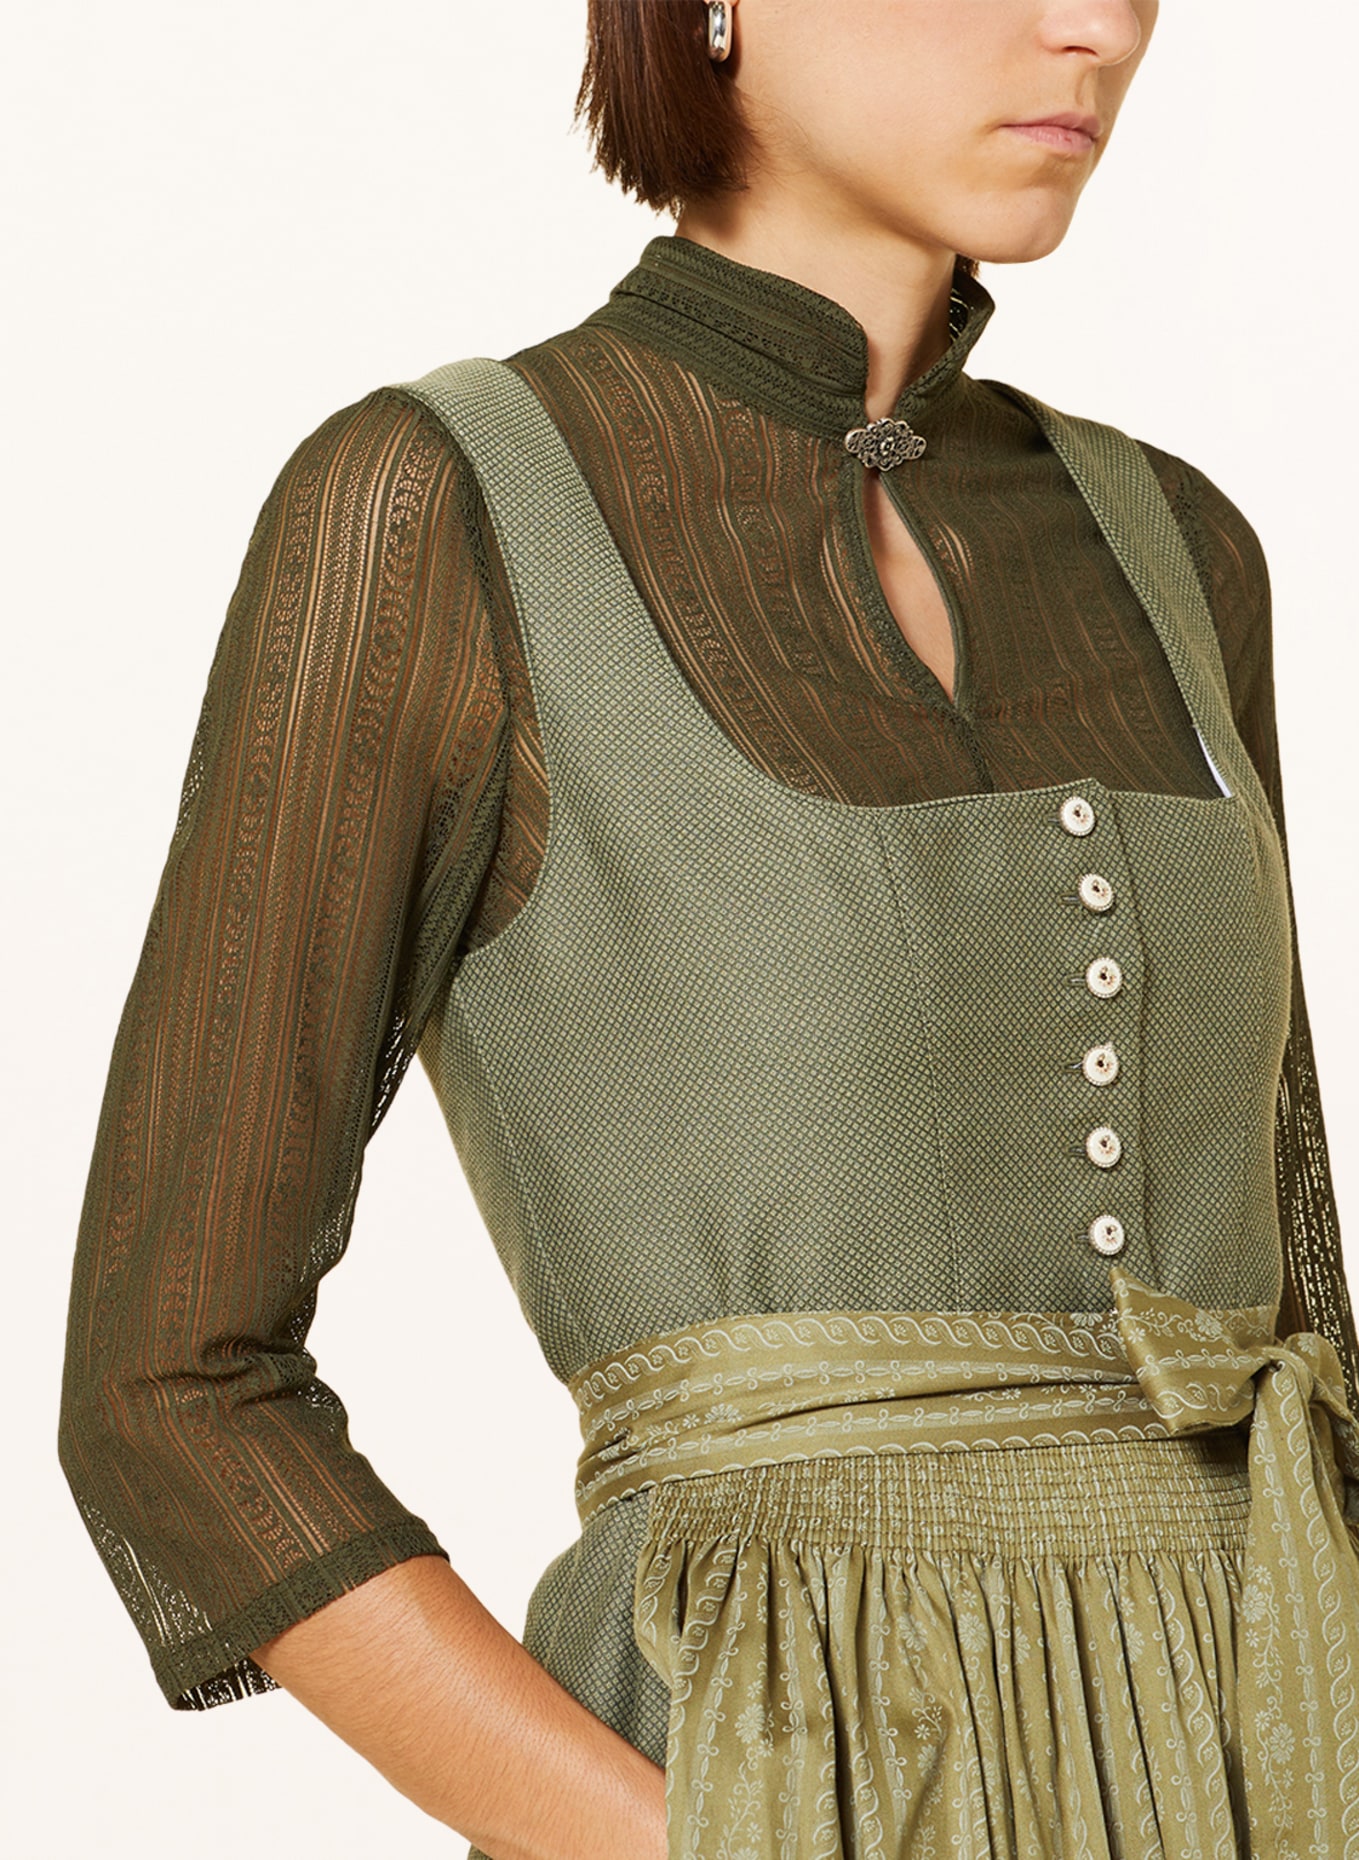 BERWIN & WOLFF Dirndl blouse made of crochet lace, Color: OLIVE (Image 3)